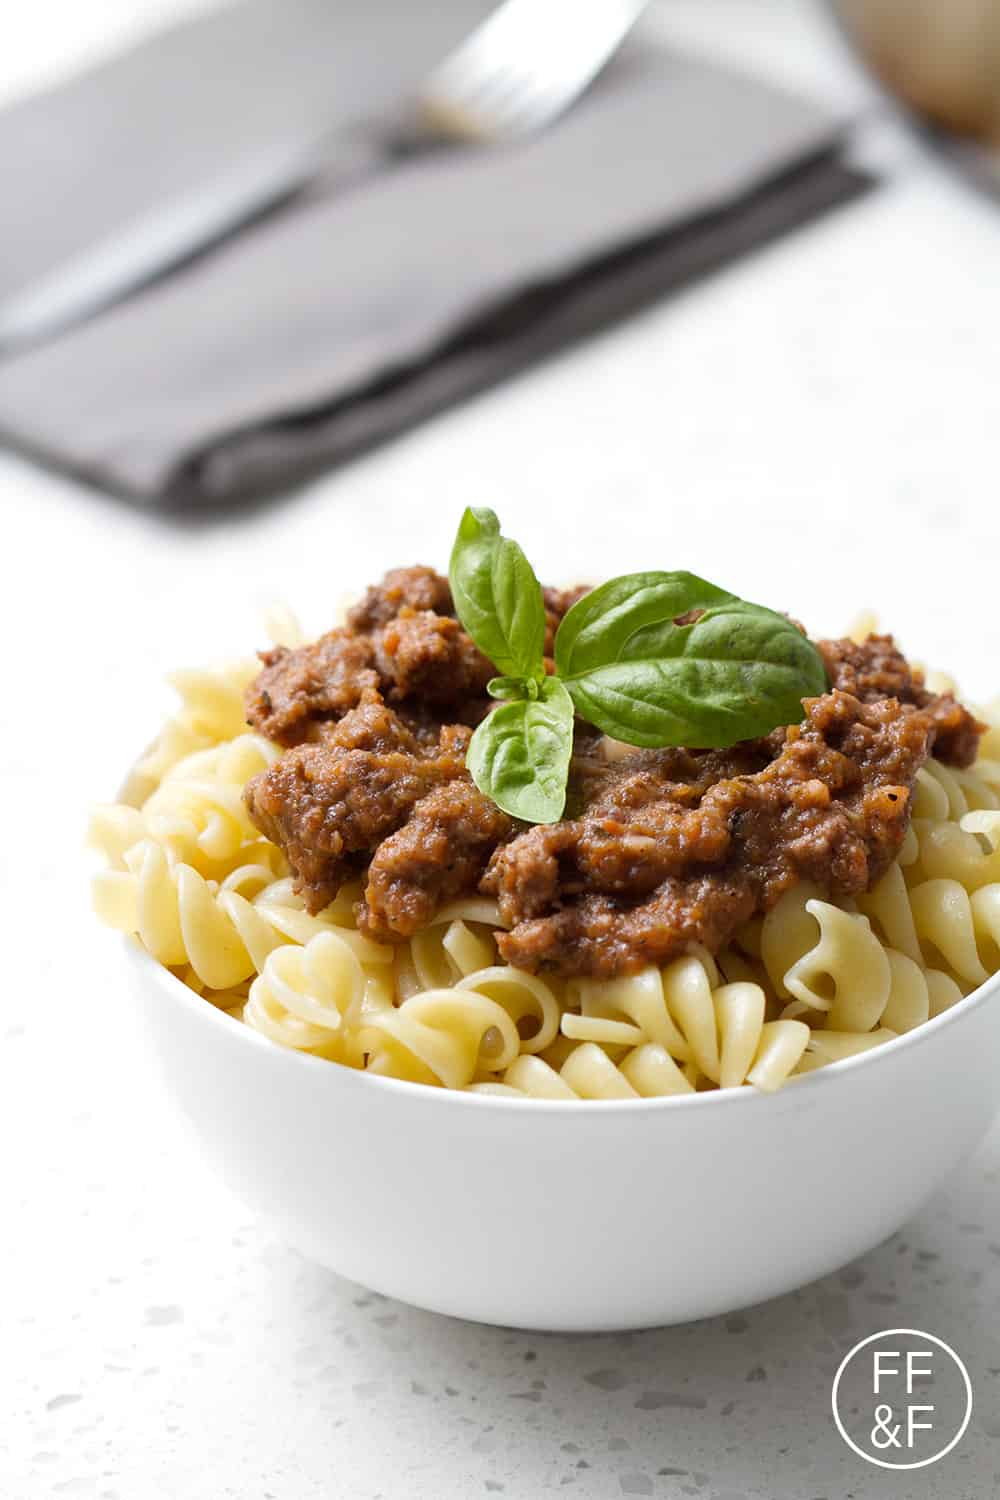 A tomato-less nomato sauce made of fresh veggies mixed with ground beef to create a not-so-classic Nomato Bolonese. This recipe is allergy friendly (gluten, dairy, shellfish, nut, egg, and soy free) and suits the autoimmune protocol diet.